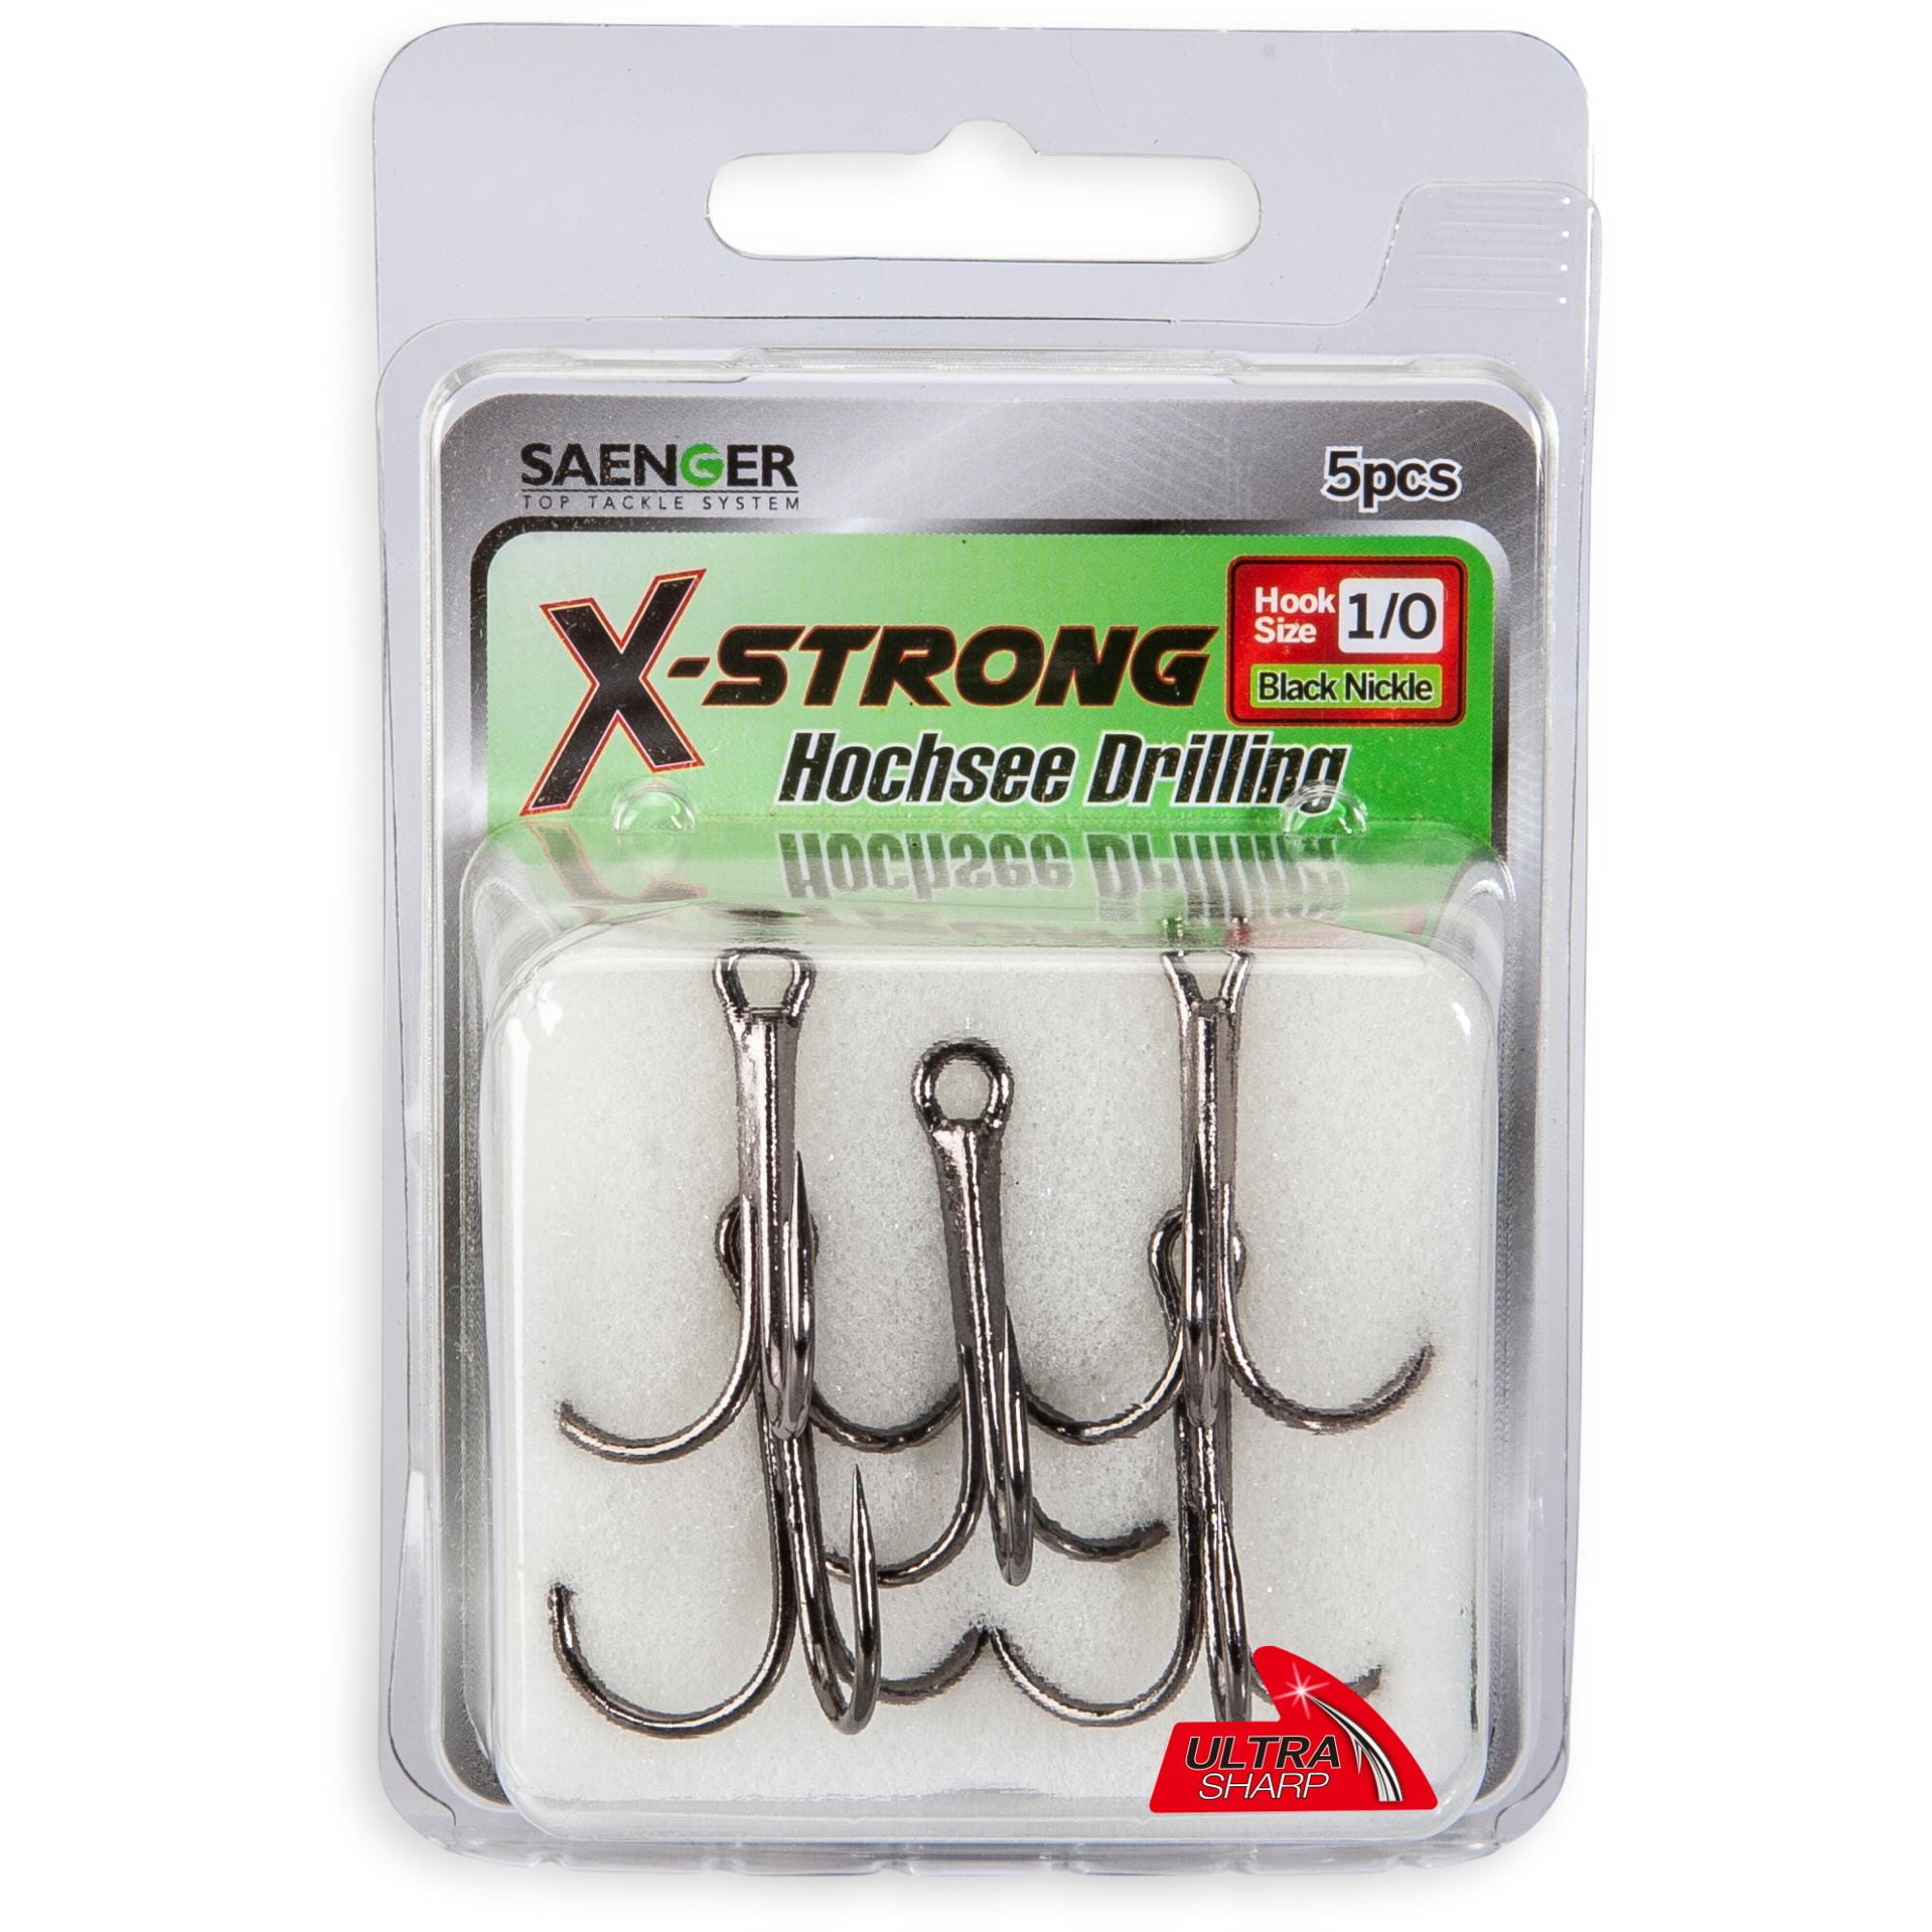 Singer X-Strong Black Nickel Treble Hook Size 02 5 pieces